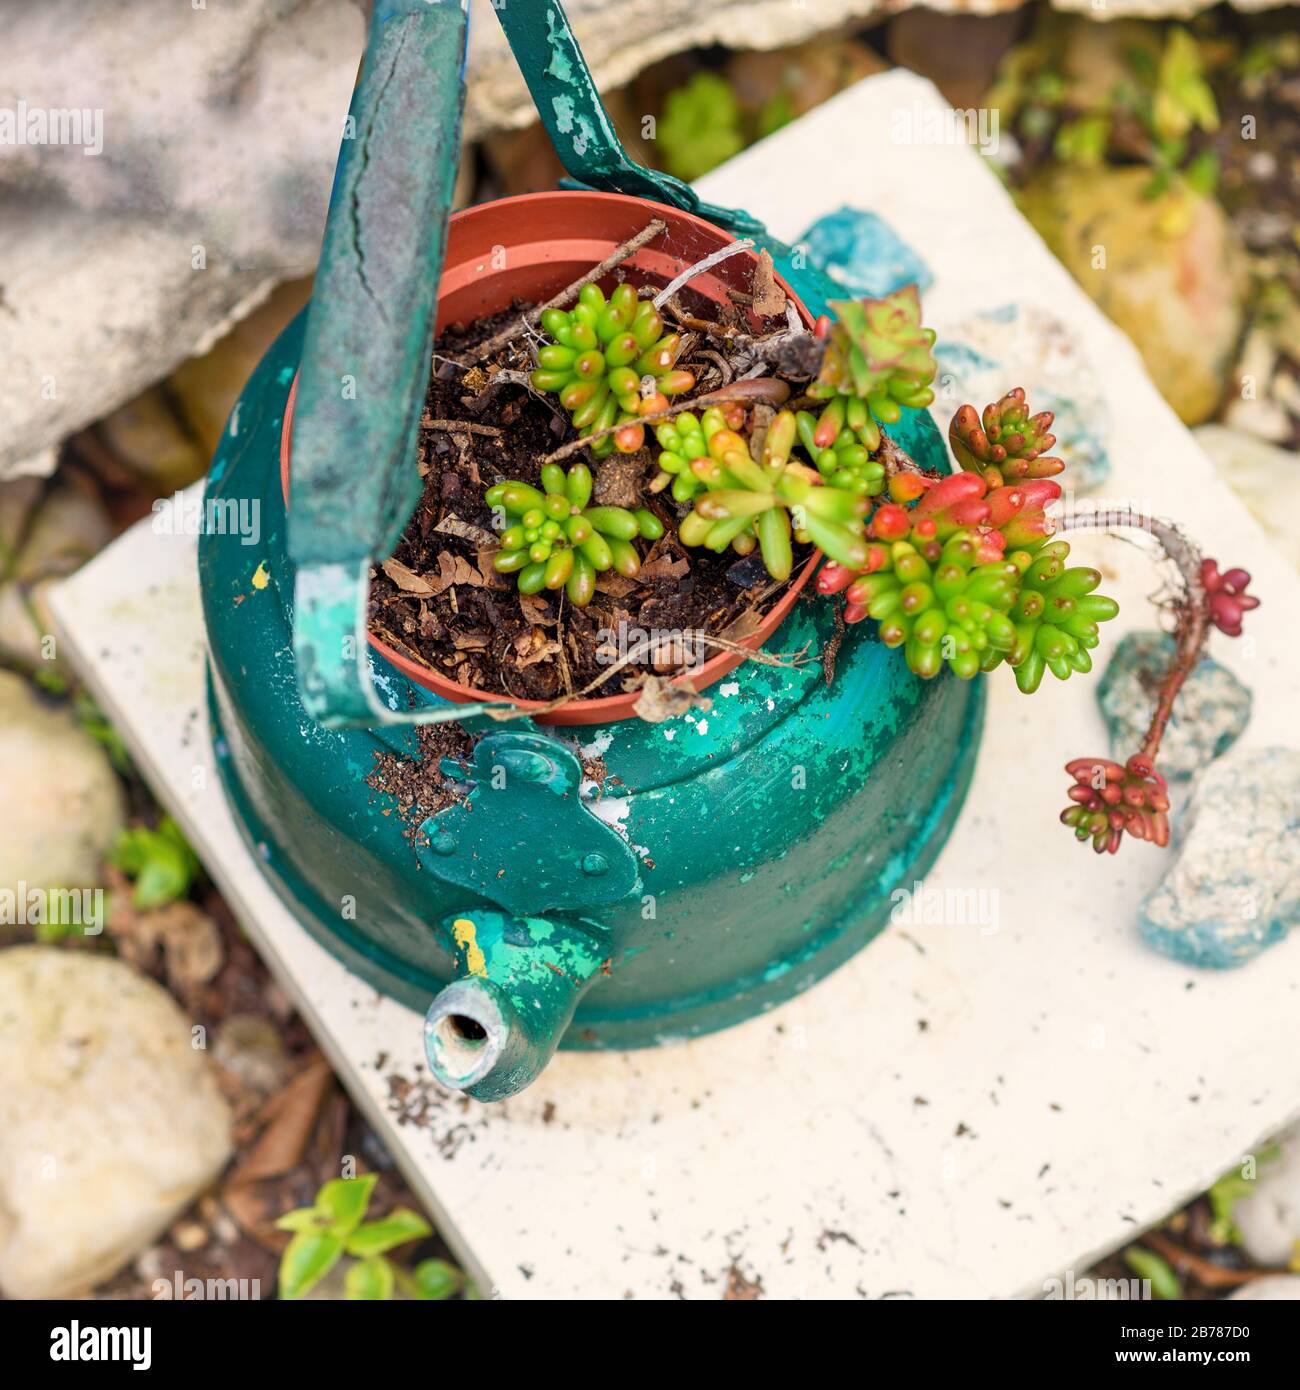 Reused planter ideas. Second-hand kettles, old teapots turn into garden flower pots. Recycled garden design and low-waste lifestyle. Stock Photo